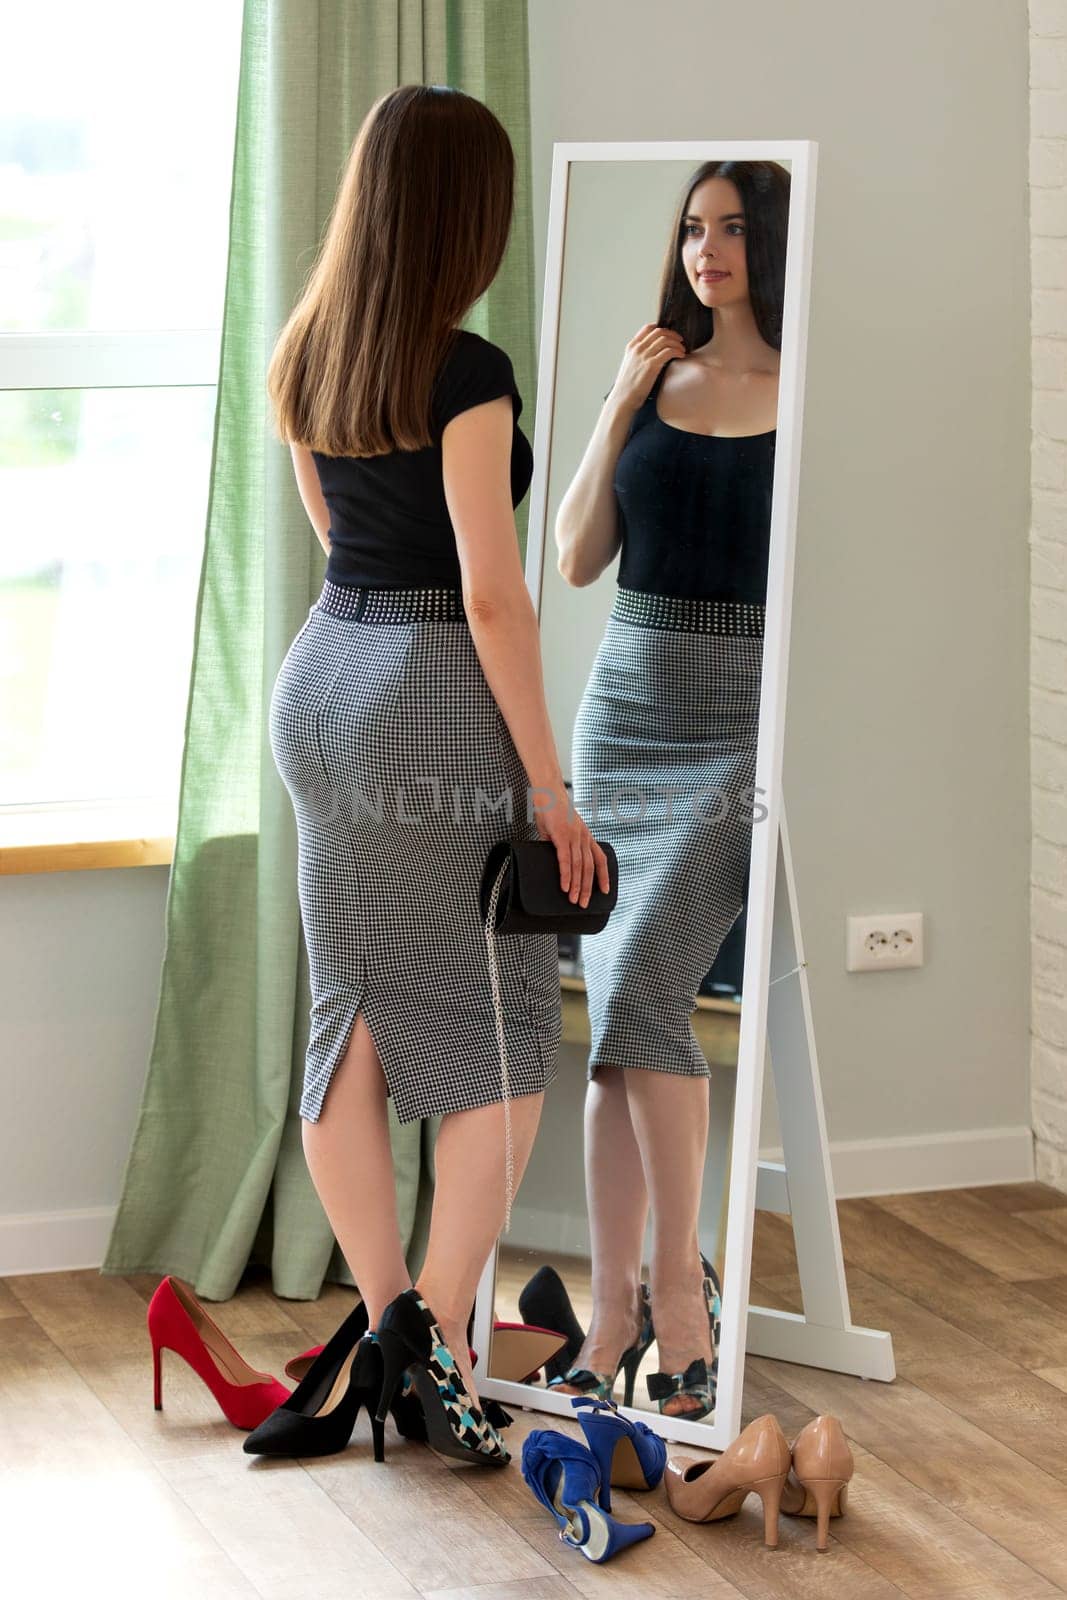 Young woman looking at her reflection in the mirror